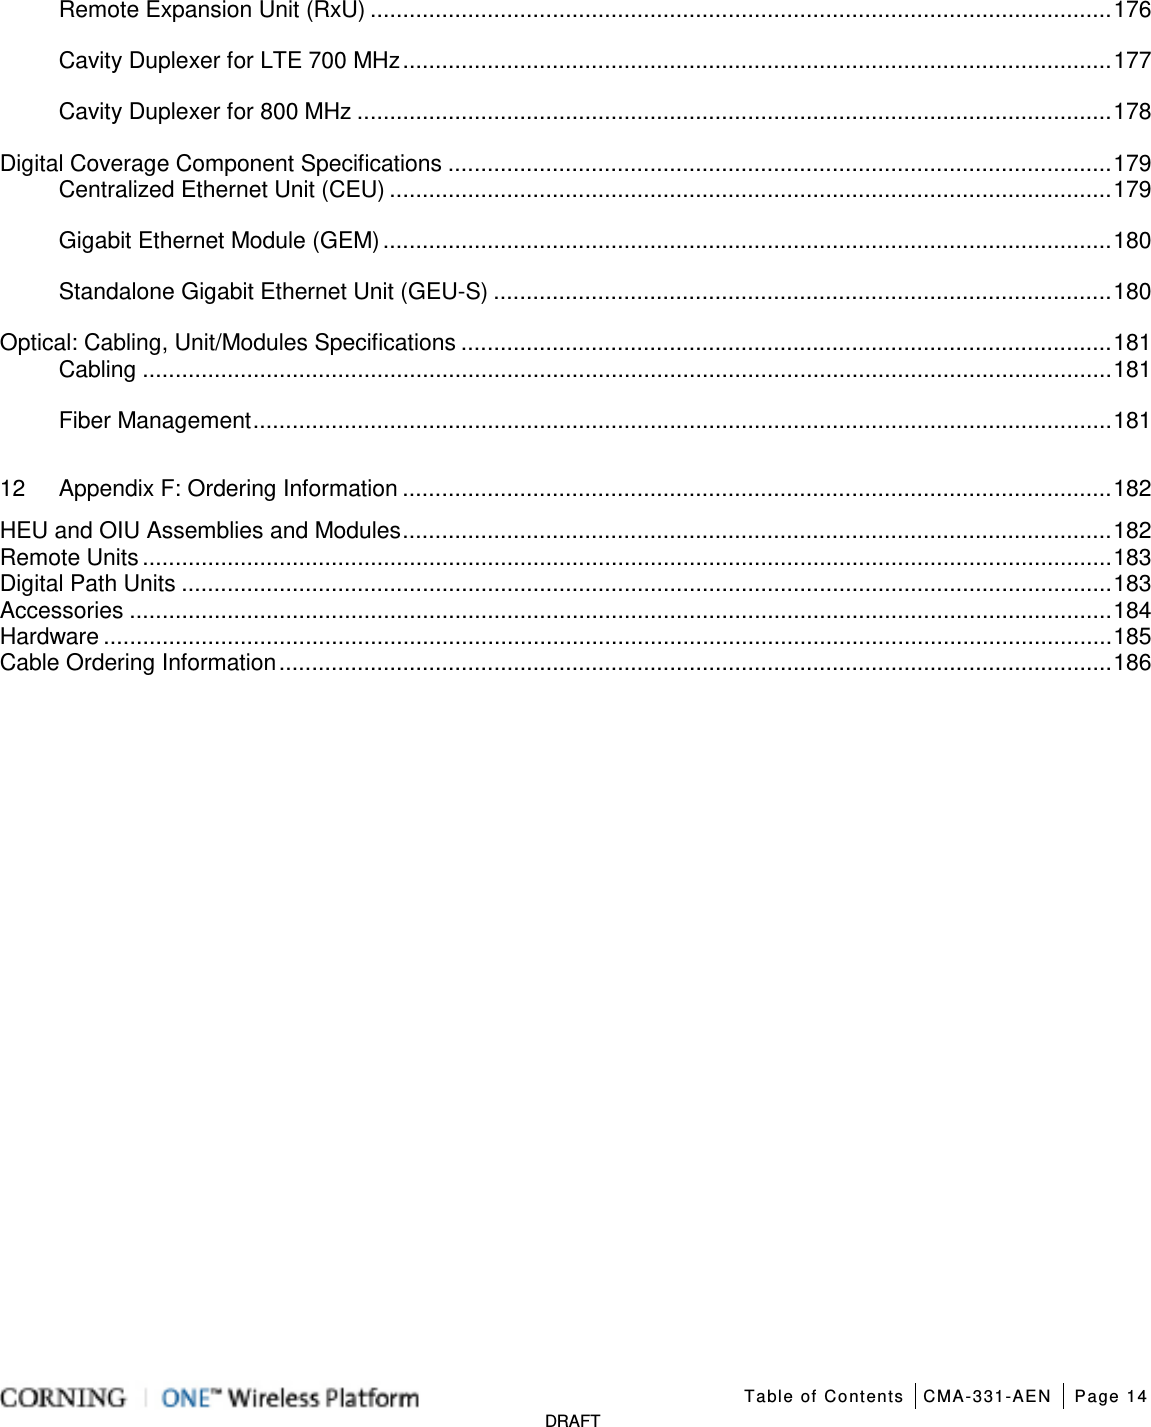   Table of Contents CMA-331-AEN Page 14   DRAFT Remote Expansion Unit (RxU) .................................................................................................................. 176 Cavity Duplexer for LTE 700 MHz ............................................................................................................. 177 Cavity Duplexer for 800 MHz .................................................................................................................... 178 Digital Coverage Component Specifications ...................................................................................................... 179 Centralized Ethernet Unit (CEU) ............................................................................................................... 179 Gigabit Ethernet Module (GEM) ................................................................................................................ 180 Standalone Gigabit Ethernet Unit (GEU-S) ............................................................................................... 180 Optical: Cabling, Unit/Modules Specifications .................................................................................................... 181 Cabling ..................................................................................................................................................... 181 Fiber Management .................................................................................................................................... 181 12 Appendix F: Ordering Information ............................................................................................................. 182 HEU and OIU Assemblies and Modules ............................................................................................................. 182 Remote Units ..................................................................................................................................................... 183 Digital Path Units ............................................................................................................................................... 183 Accessories ....................................................................................................................................................... 184 Hardware ........................................................................................................................................................... 185 Cable Ordering Information ................................................................................................................................ 186    